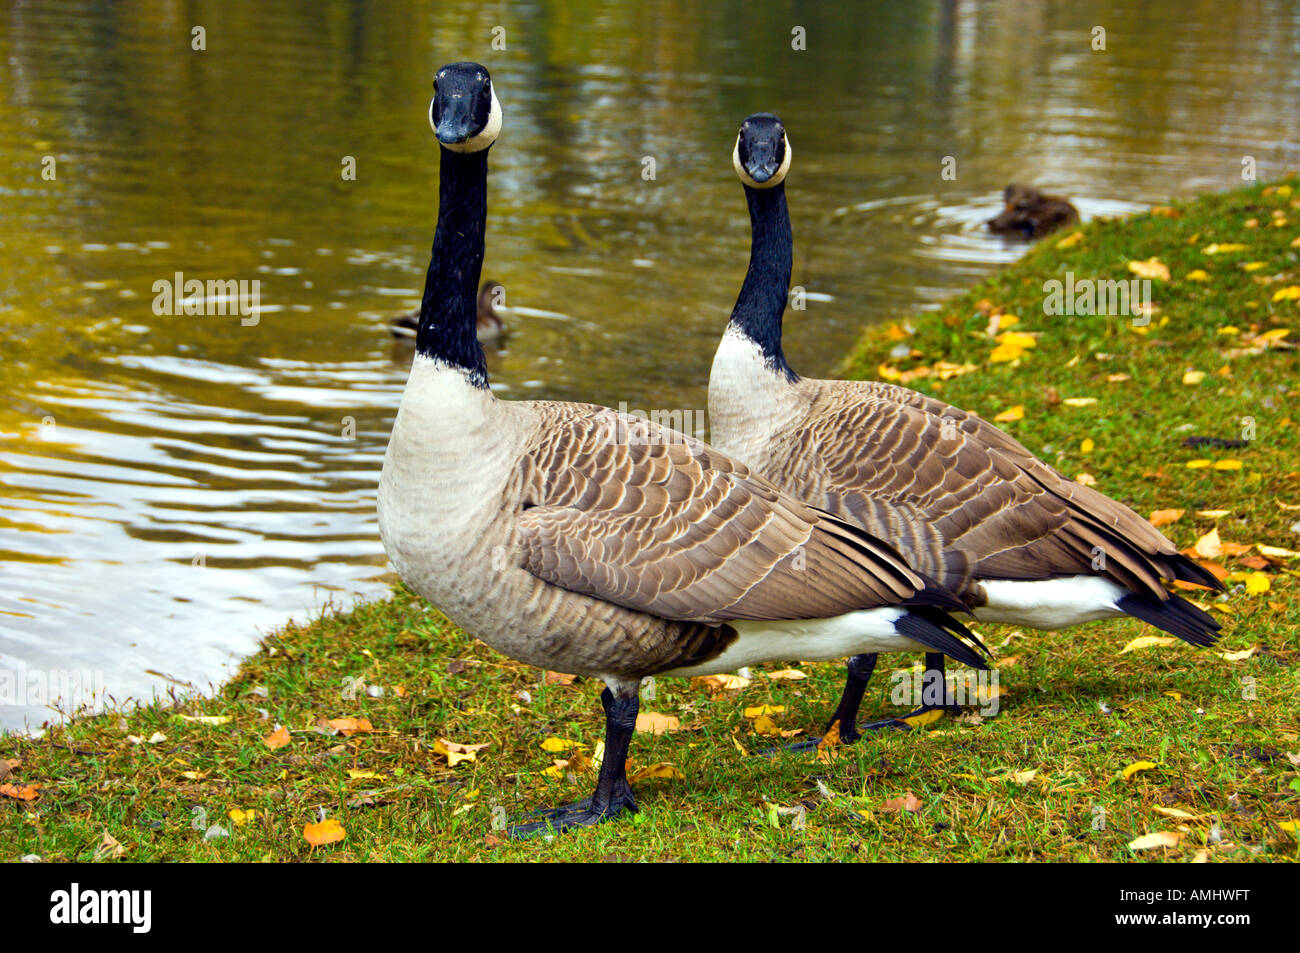 Two large Canada geese looking directly at the camera in St Vital Park in Winnipeg Manitoba Canada Stock Photo